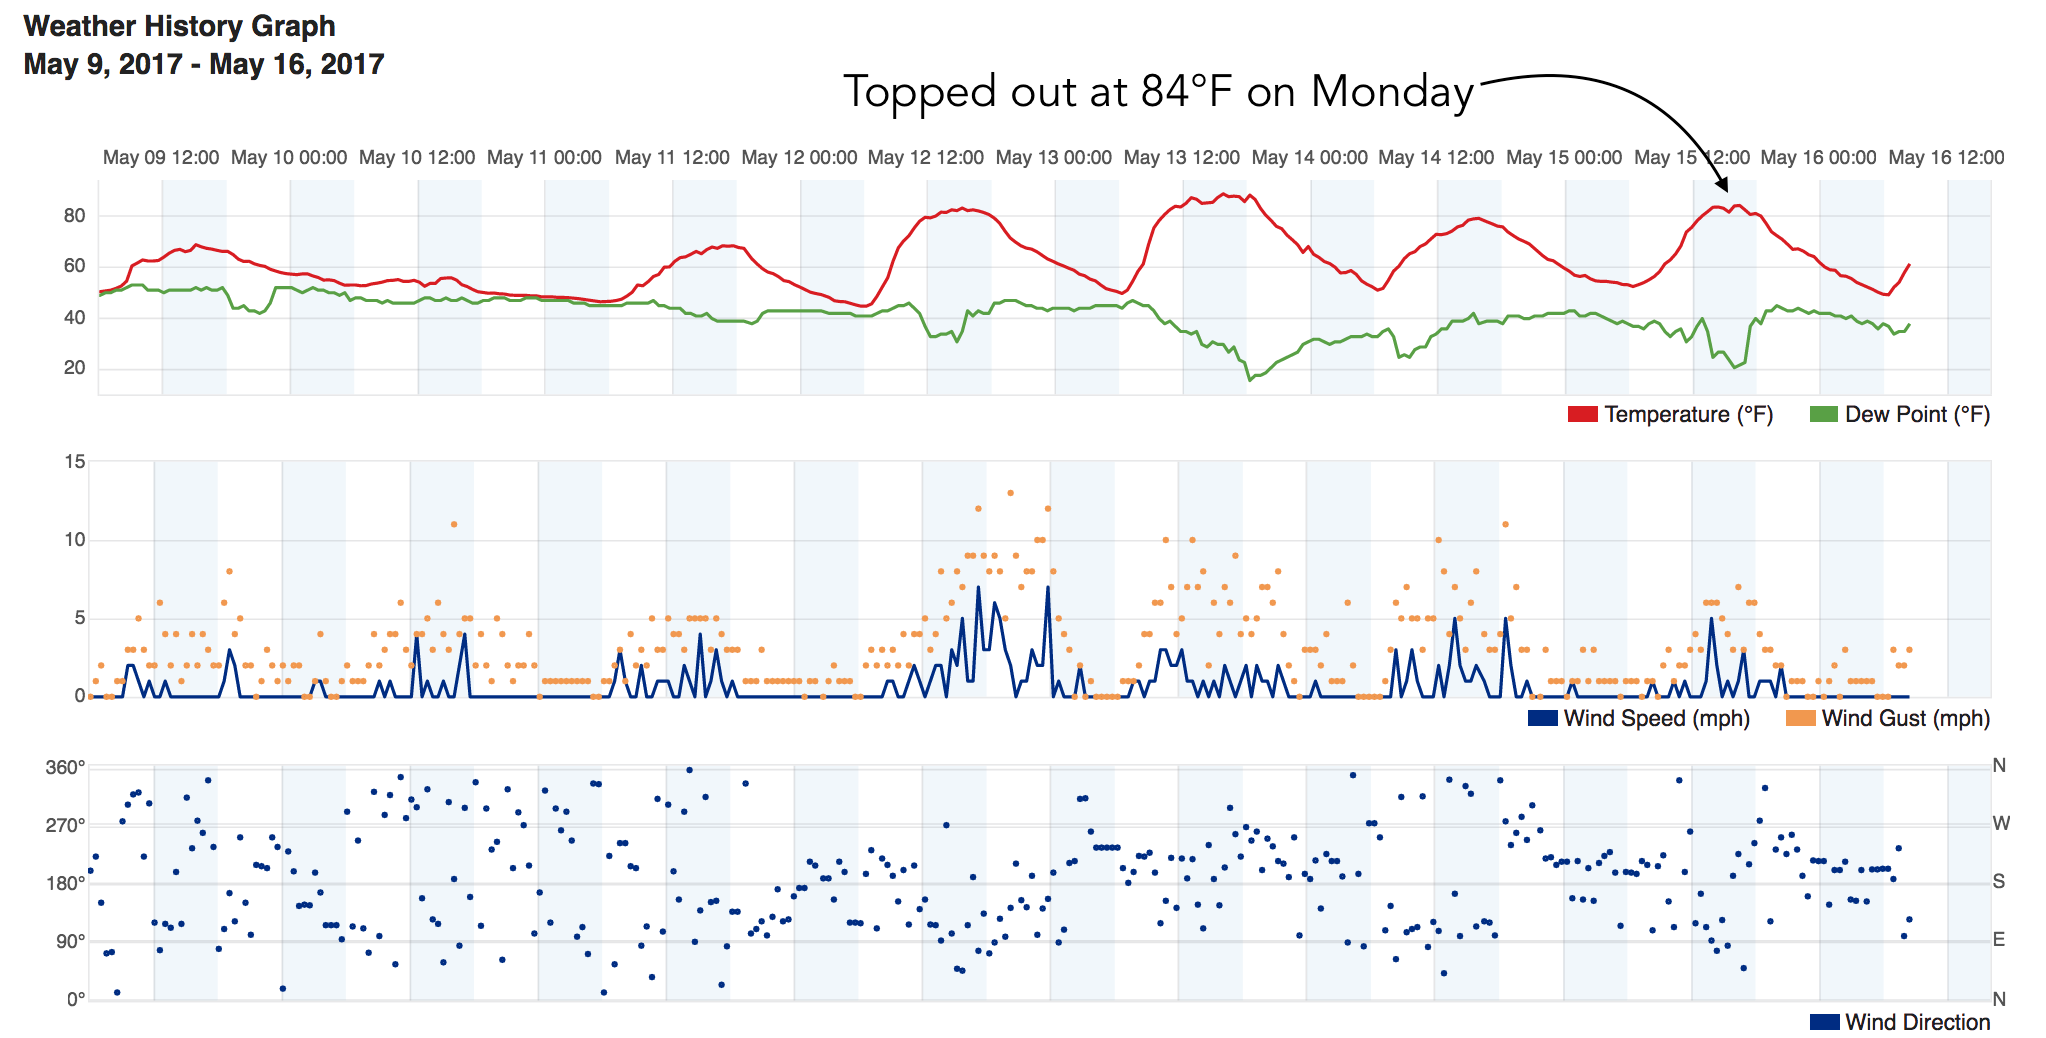 Weather5280 weather station reports over the last week